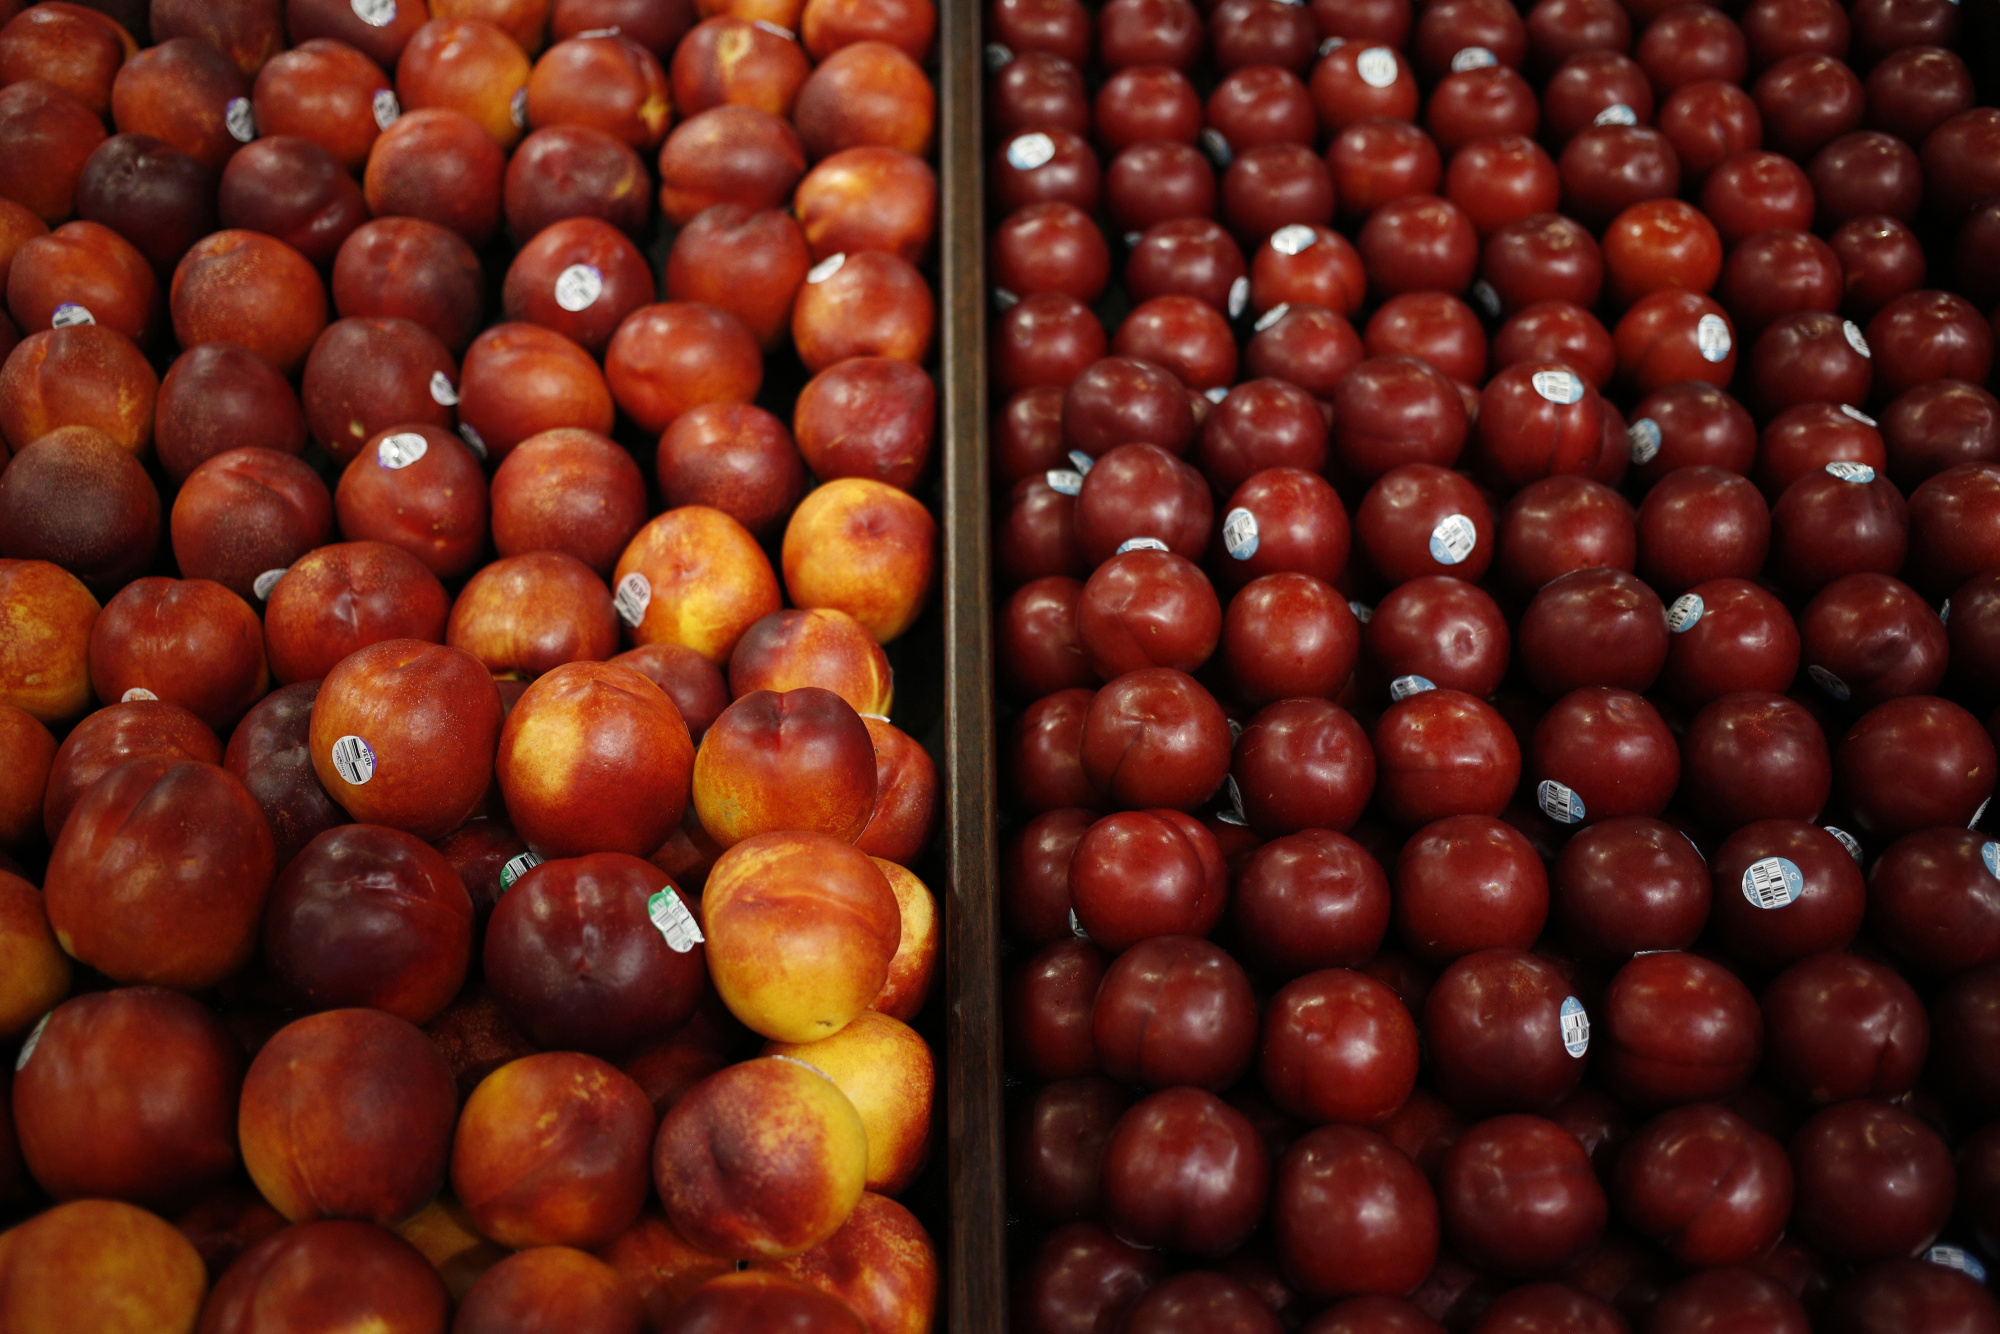 Nectarines are displayed for sale inside a Kroger Co. grocery store in Louisville, Kentucky, U.S., on Tuesday, Feb. 7, 2017. Photographer: Luke Sharrett/Bloomberg